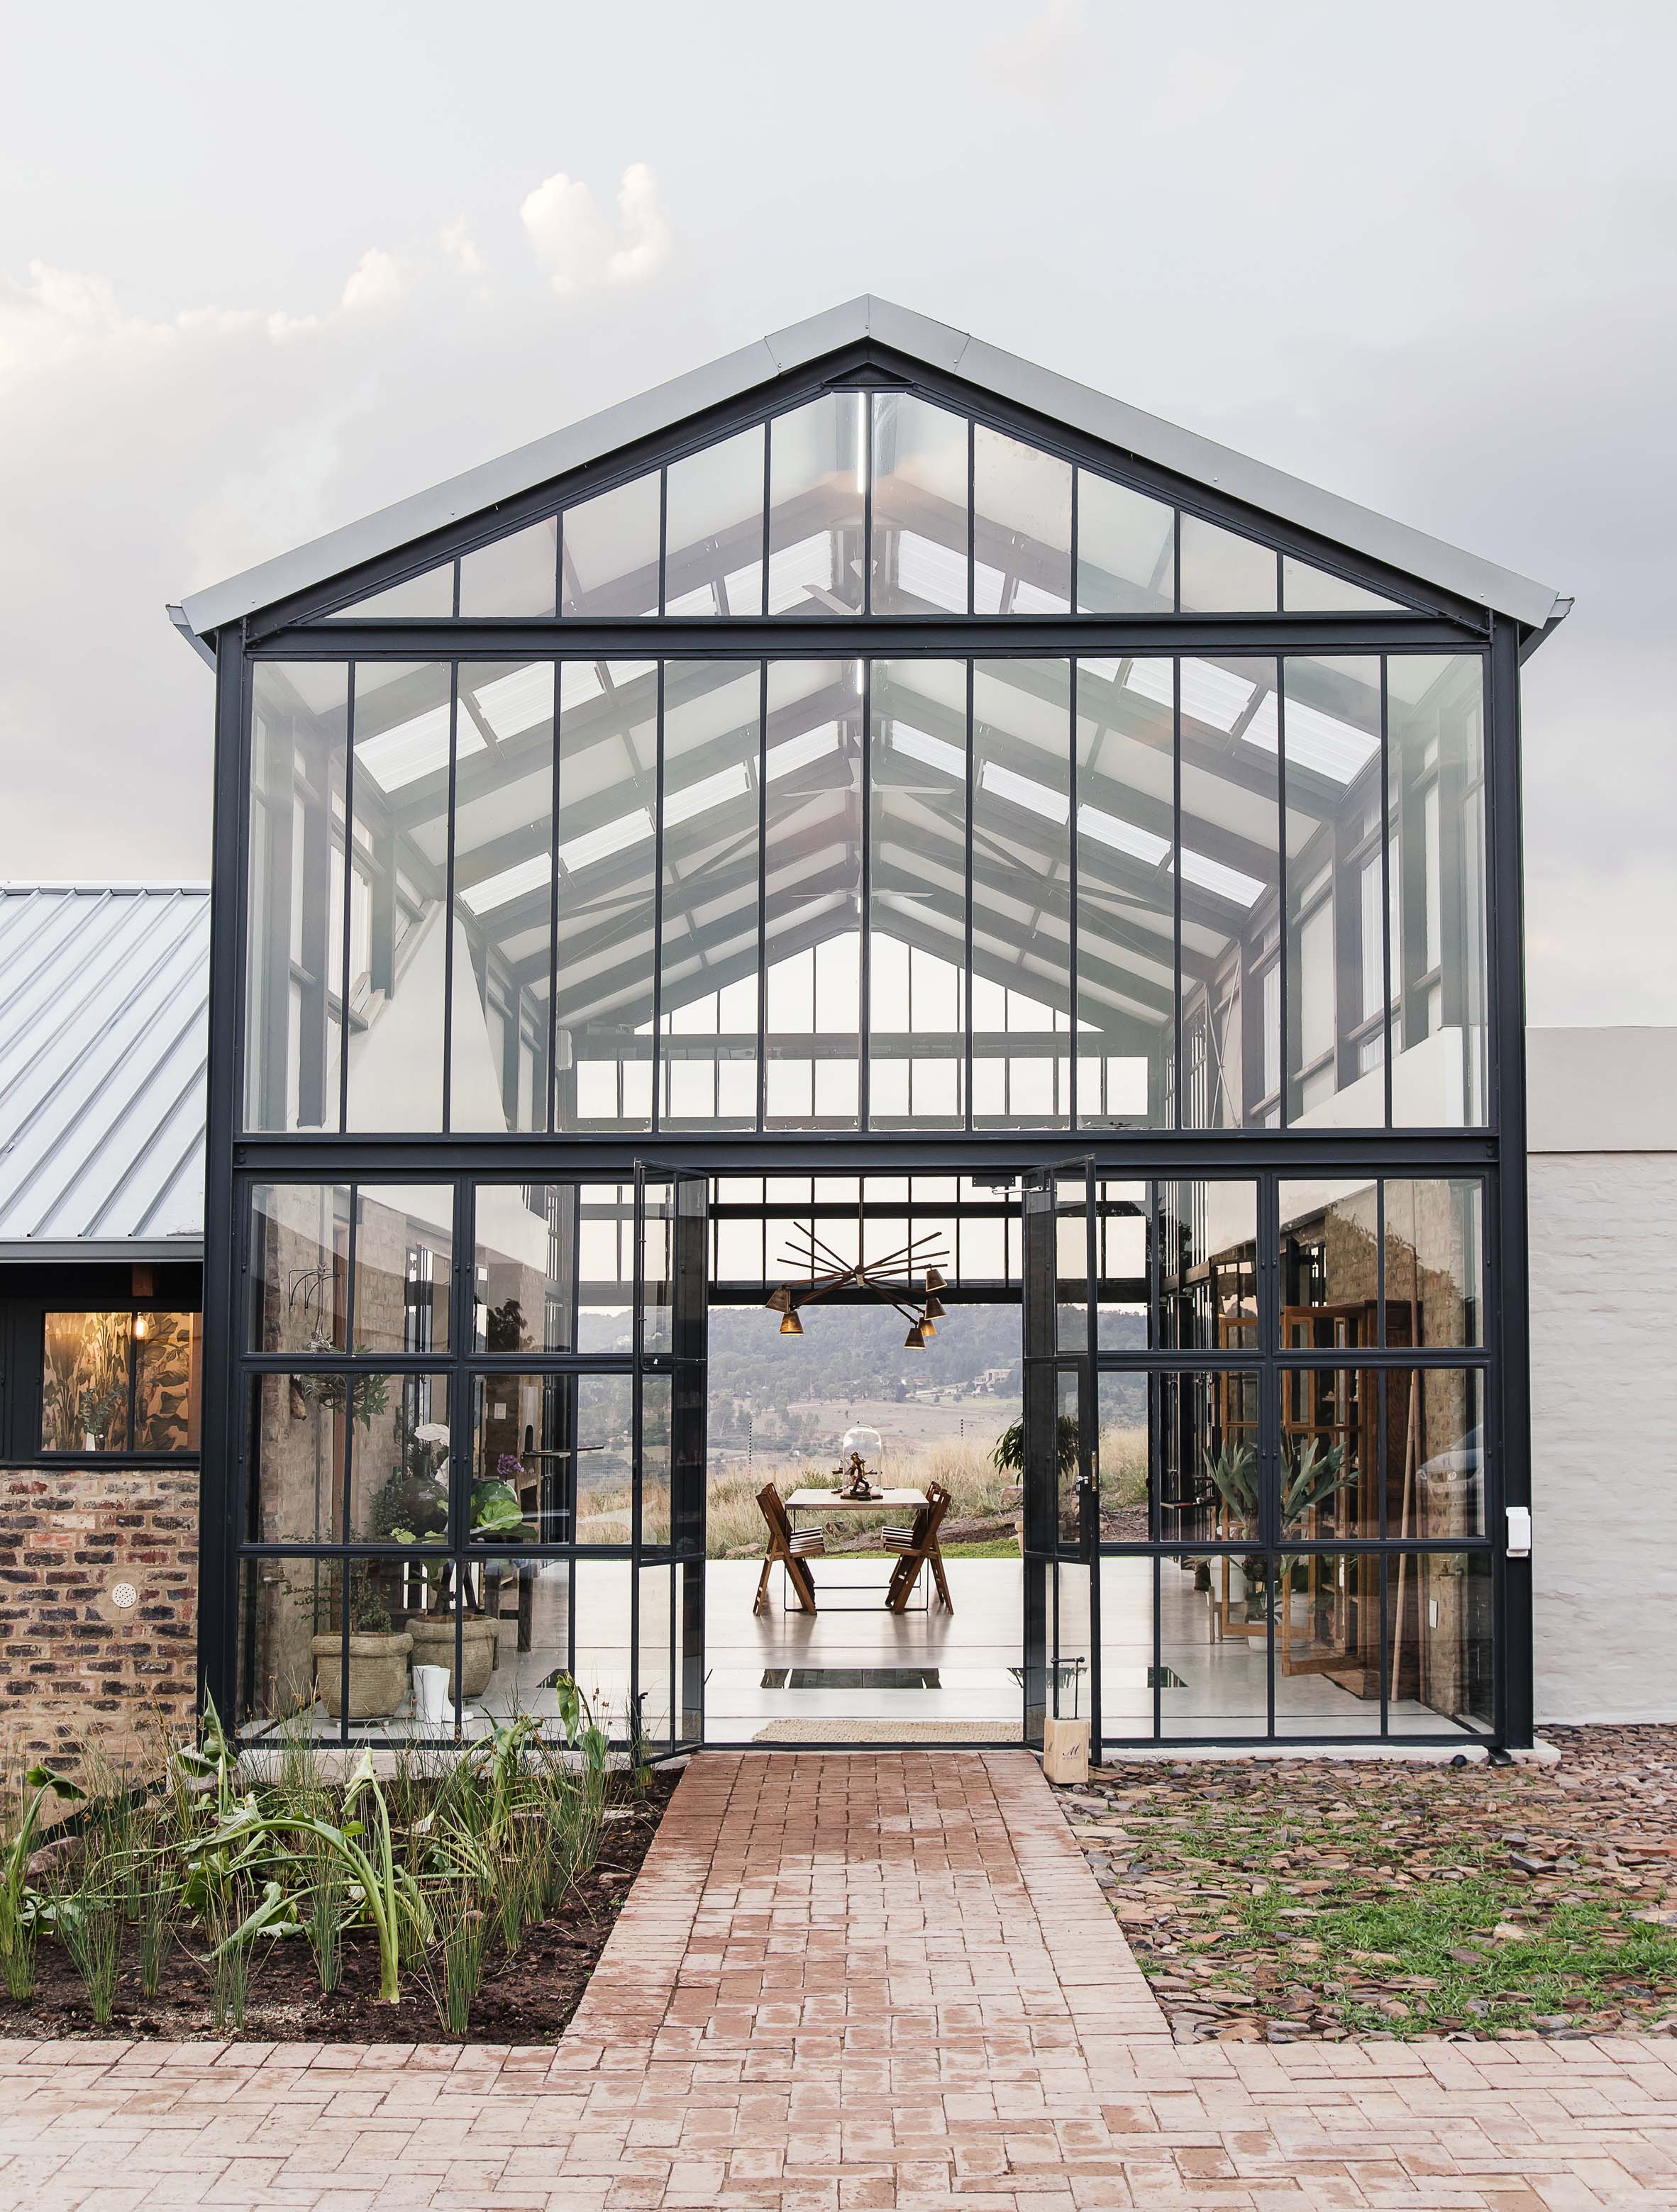 Barn-inspired Conservatory House is an off-grid escape on a Pretoria farm